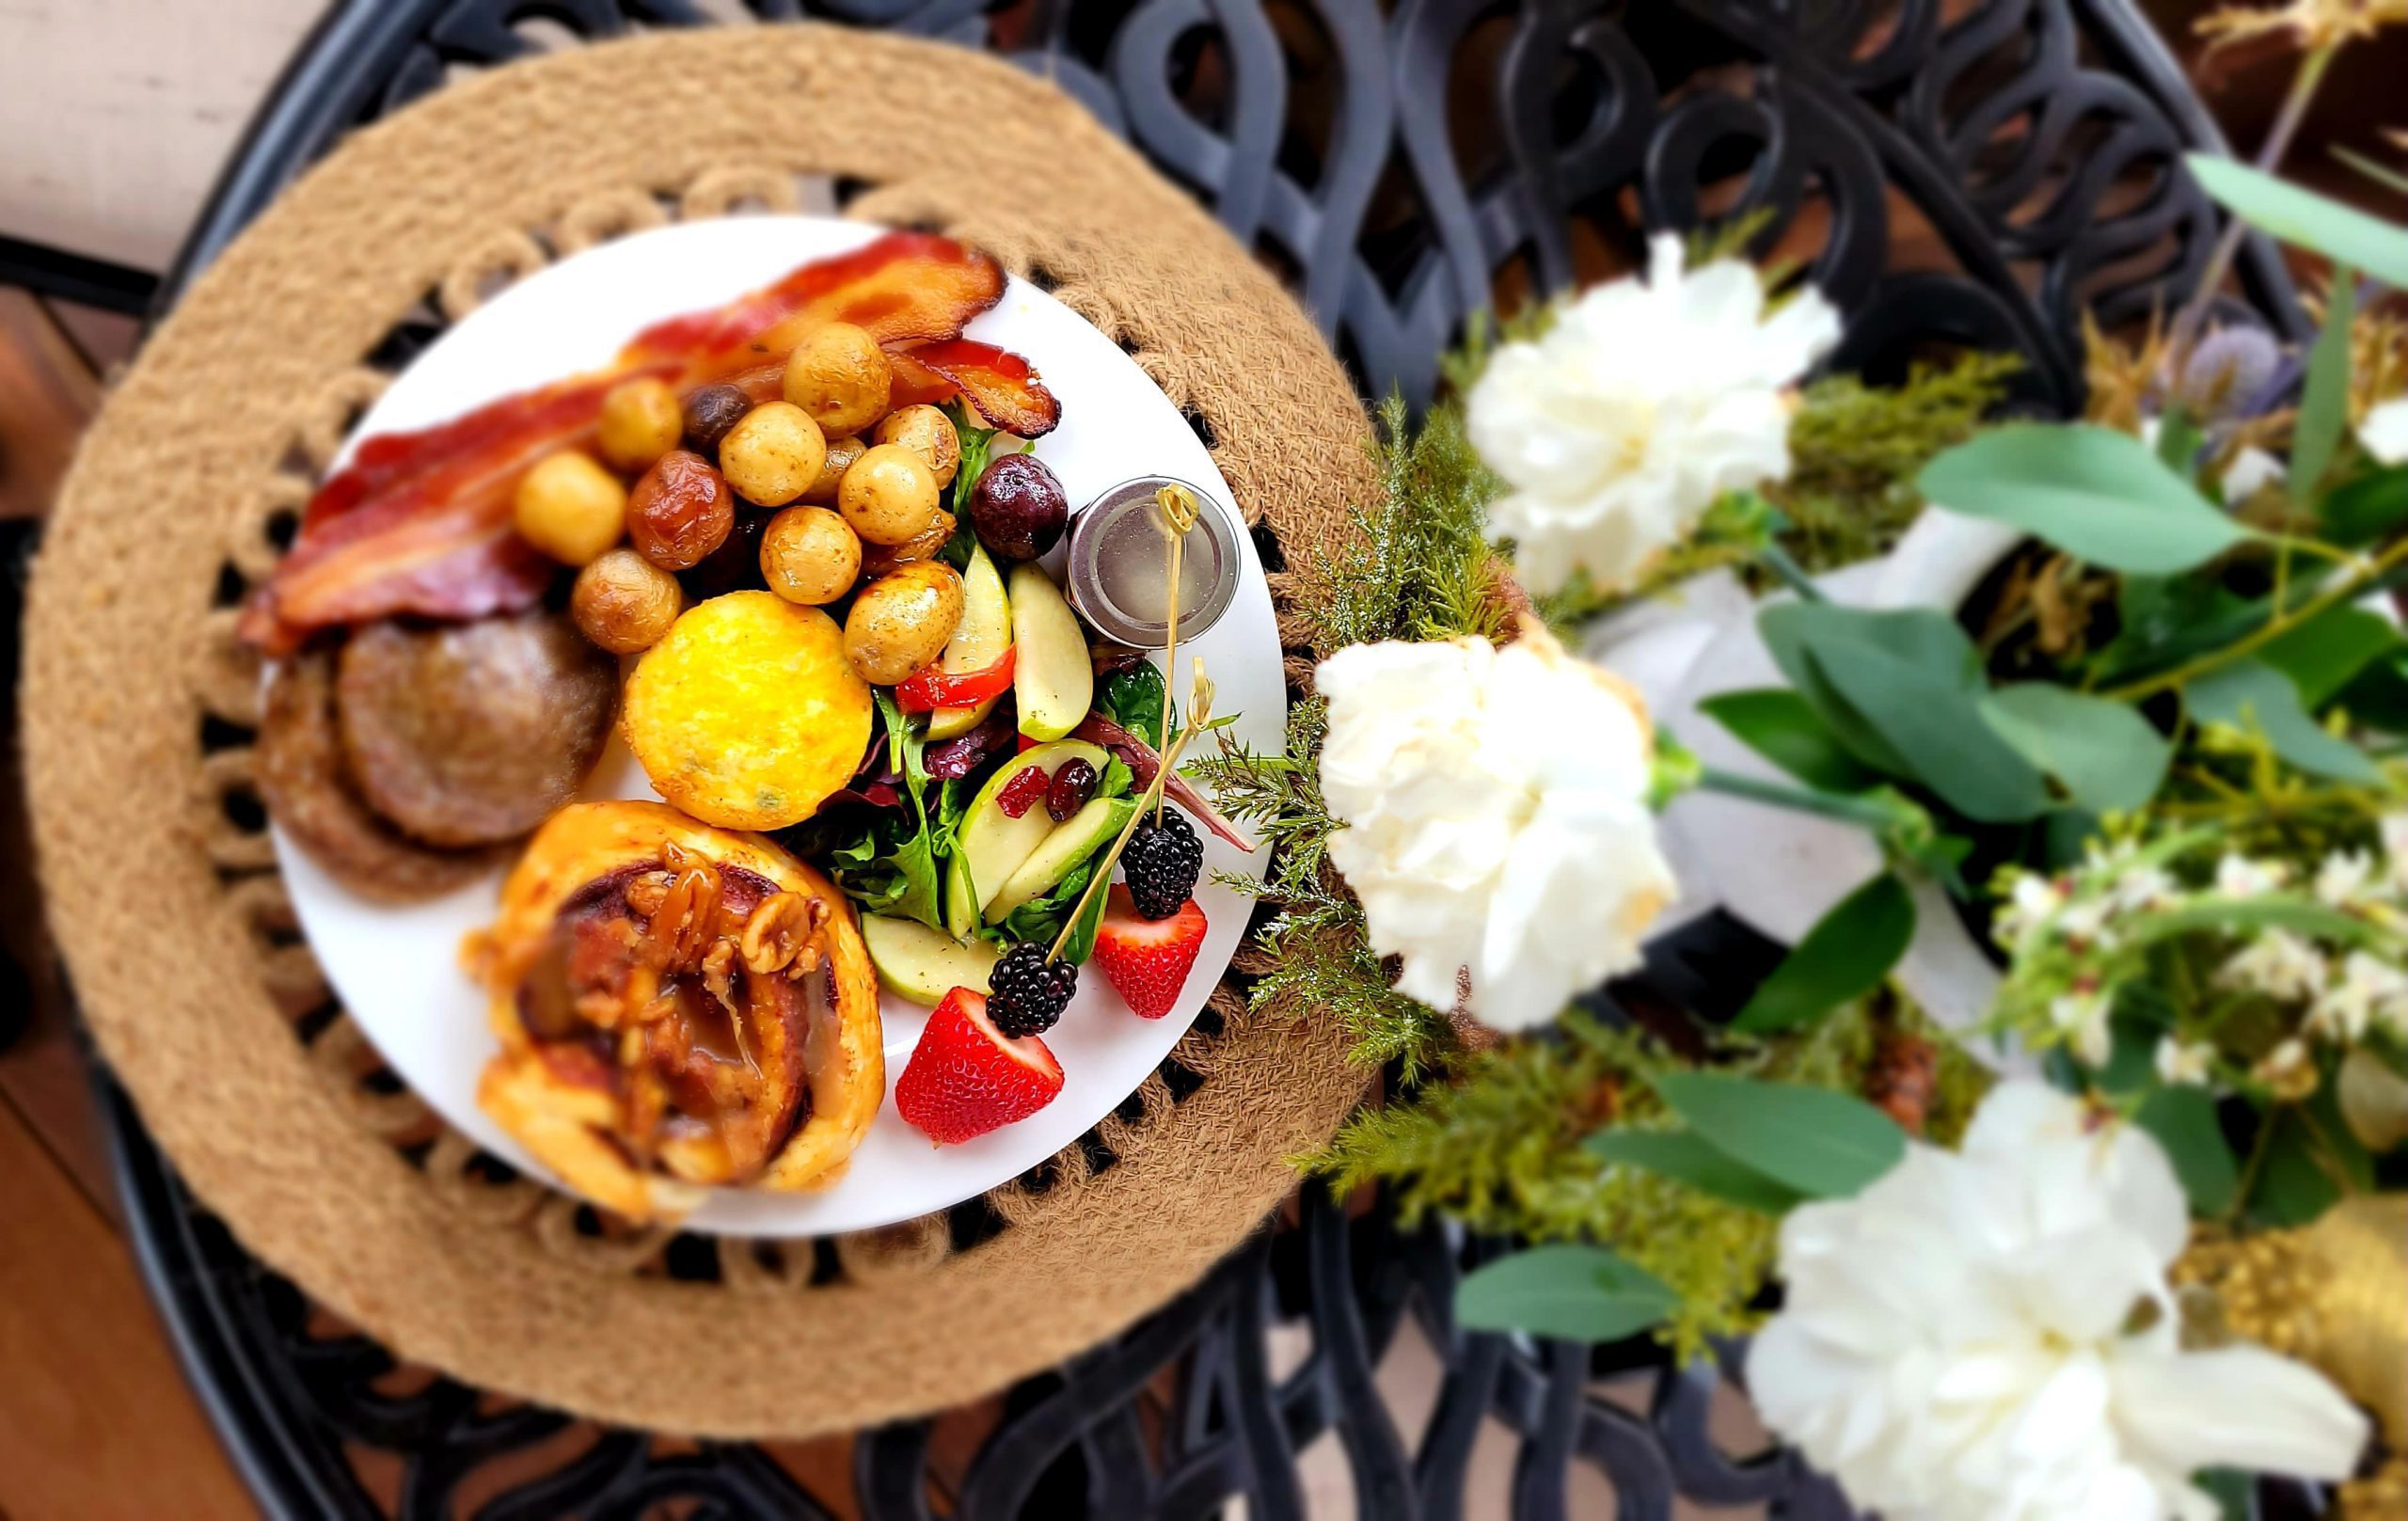 Plate of food with white flower bouquet beside it